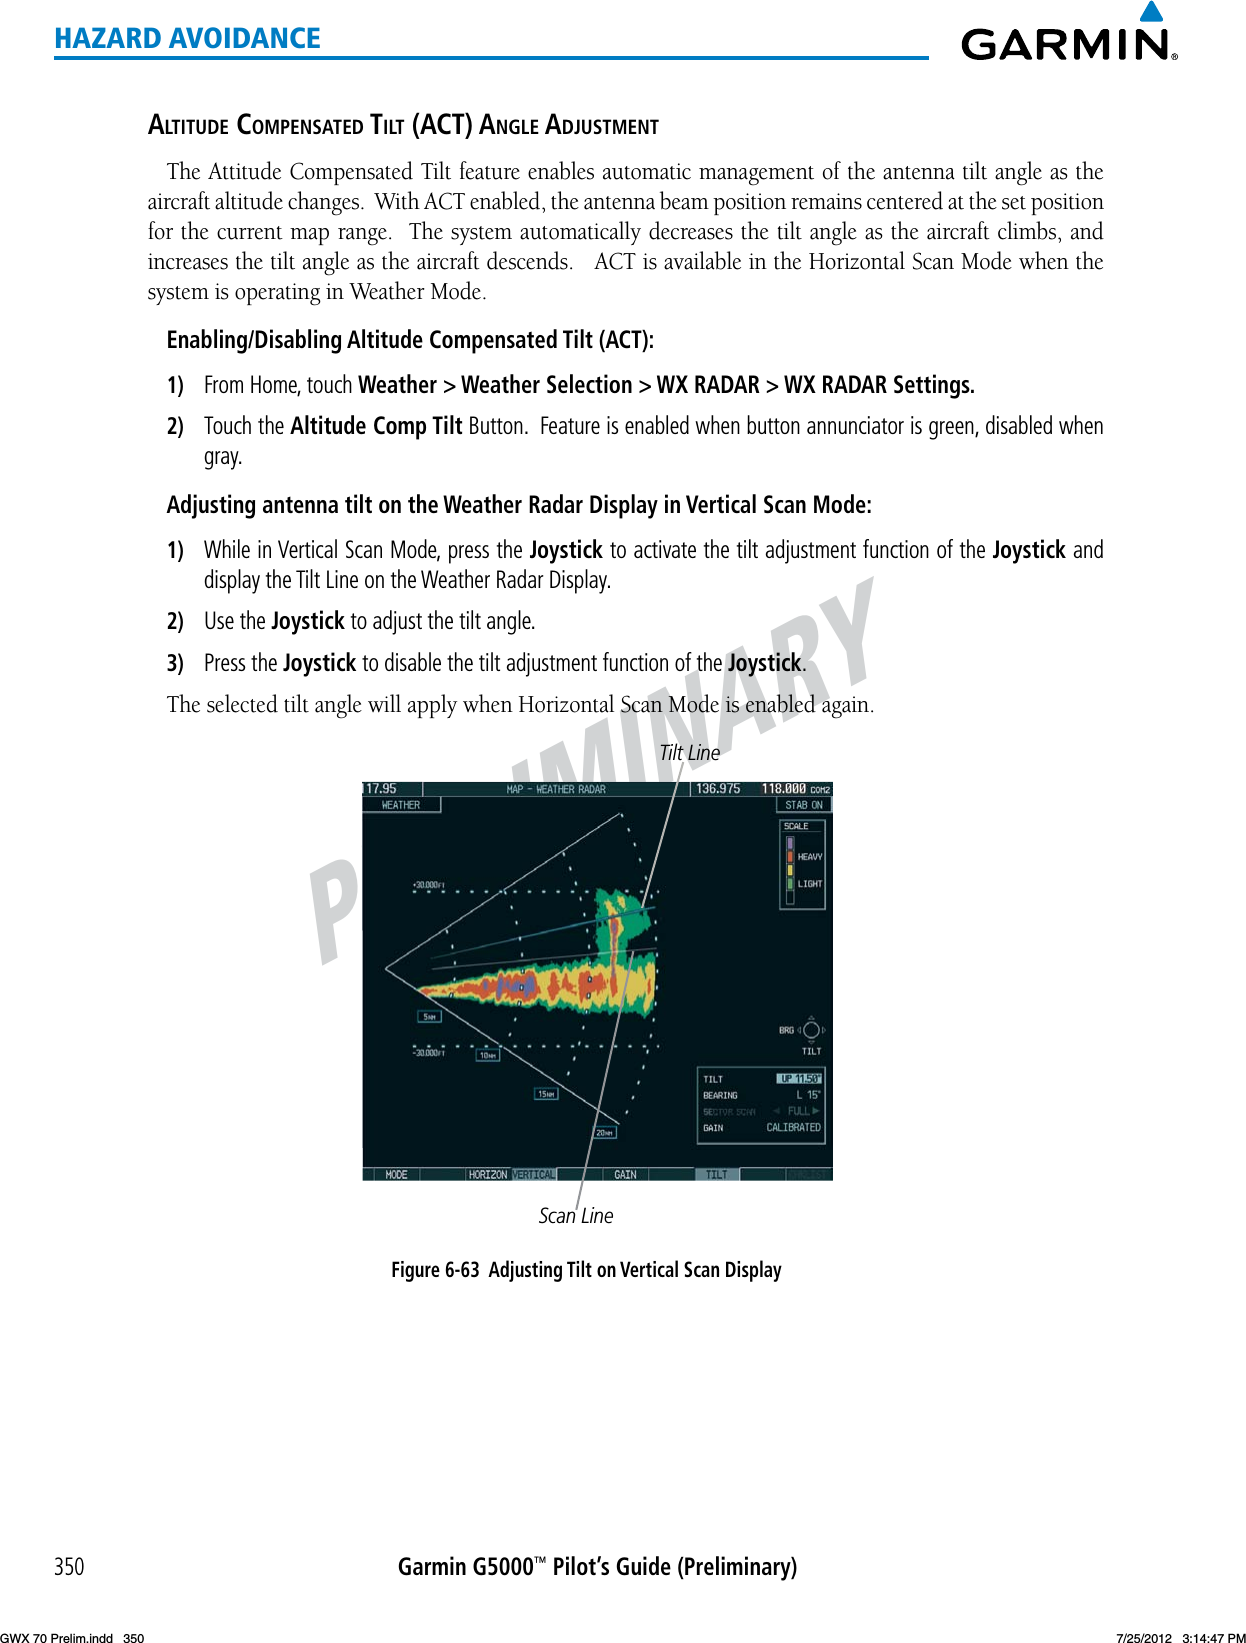 PRELIMINARYGarmin G5000™ Pilot’s Guide (Preliminary)350HAZARD AVOIDANCEaltitude comPensated tilt (act) anGle adjustmentThe Attitude Compensated Tilt feature enables automatic management of the antenna tilt angle as the aircraft altitude changes.  With ACT enabled, the antenna beam position remains centered at the set position for the current map range.  The system automatically decreases the tilt angle as the aircraft climbs, and increasesthetiltangleastheaircraftdescends.ACTisavailableintheHorizontalScanModewhenthesystem is operating in Weather Mode.Enabling/Disabling Altitude Compensated Tilt (ACT):1)  From Home, touch Weather &gt; Weather Selection &gt; WX RADAR &gt; WX RADAR Settings.2)  Touch the Altitude Comp Tilt Button.  Feature is enabled when button annunciator is green, disabled when gray.Adjusting antenna tilt on the Weather Radar Display in Vertical Scan Mode:1)  While in Vertical Scan Mode, press the Joystick to activate the tilt adjustment function of the Joystick and display the Tilt Line on the Weather Radar Display.2)  Use the Joystick to adjust the tilt angle.3)  Press the Joystick to disable the tilt adjustment function of the Joystick.TheselectedtiltanglewillapplywhenHorizontalScanModeisenabledagain.Figure 6-63  Adjusting Tilt on Vertical Scan DisplayTilt LineScan LineGWX 70 Prelim.indd   350 7/25/2012   3:14:47 PM